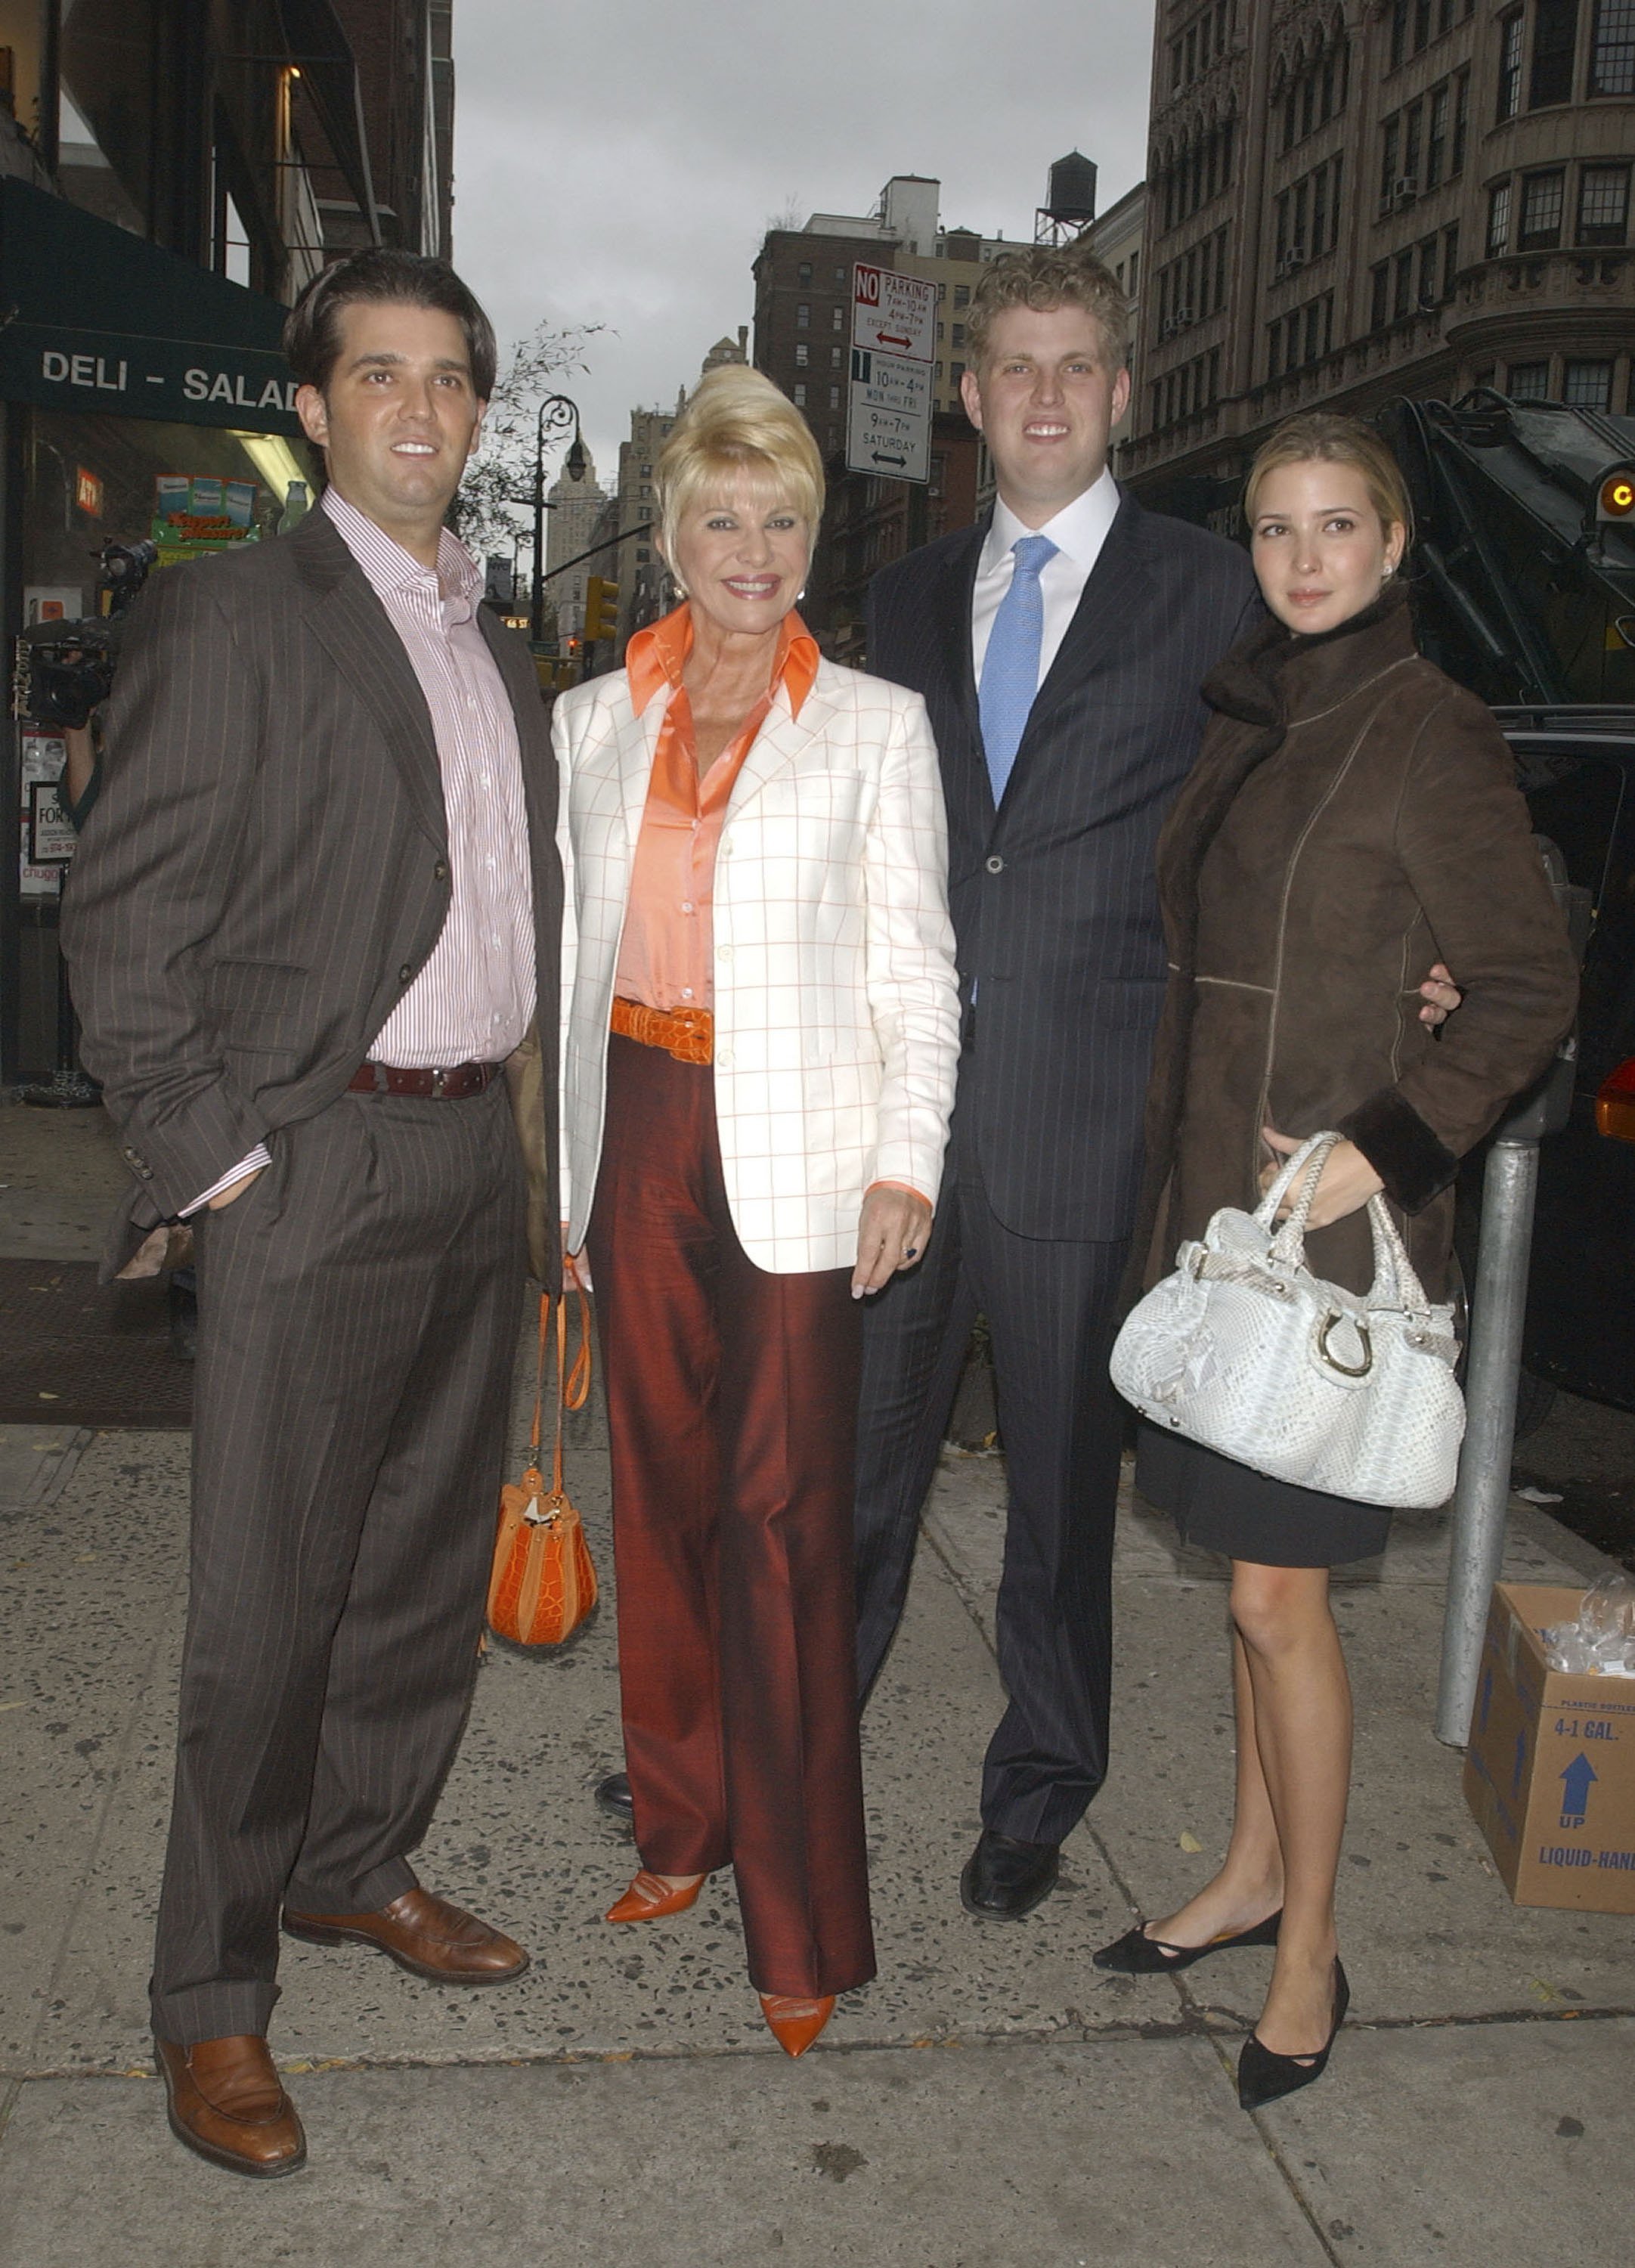 Ivana Trump poses with her children, Donald Trump Jr., Eric Trump and Ivanka Trump, after lunch at Frederick's Madison November 16, 2006 in New York City.  |  Source: Getty Images